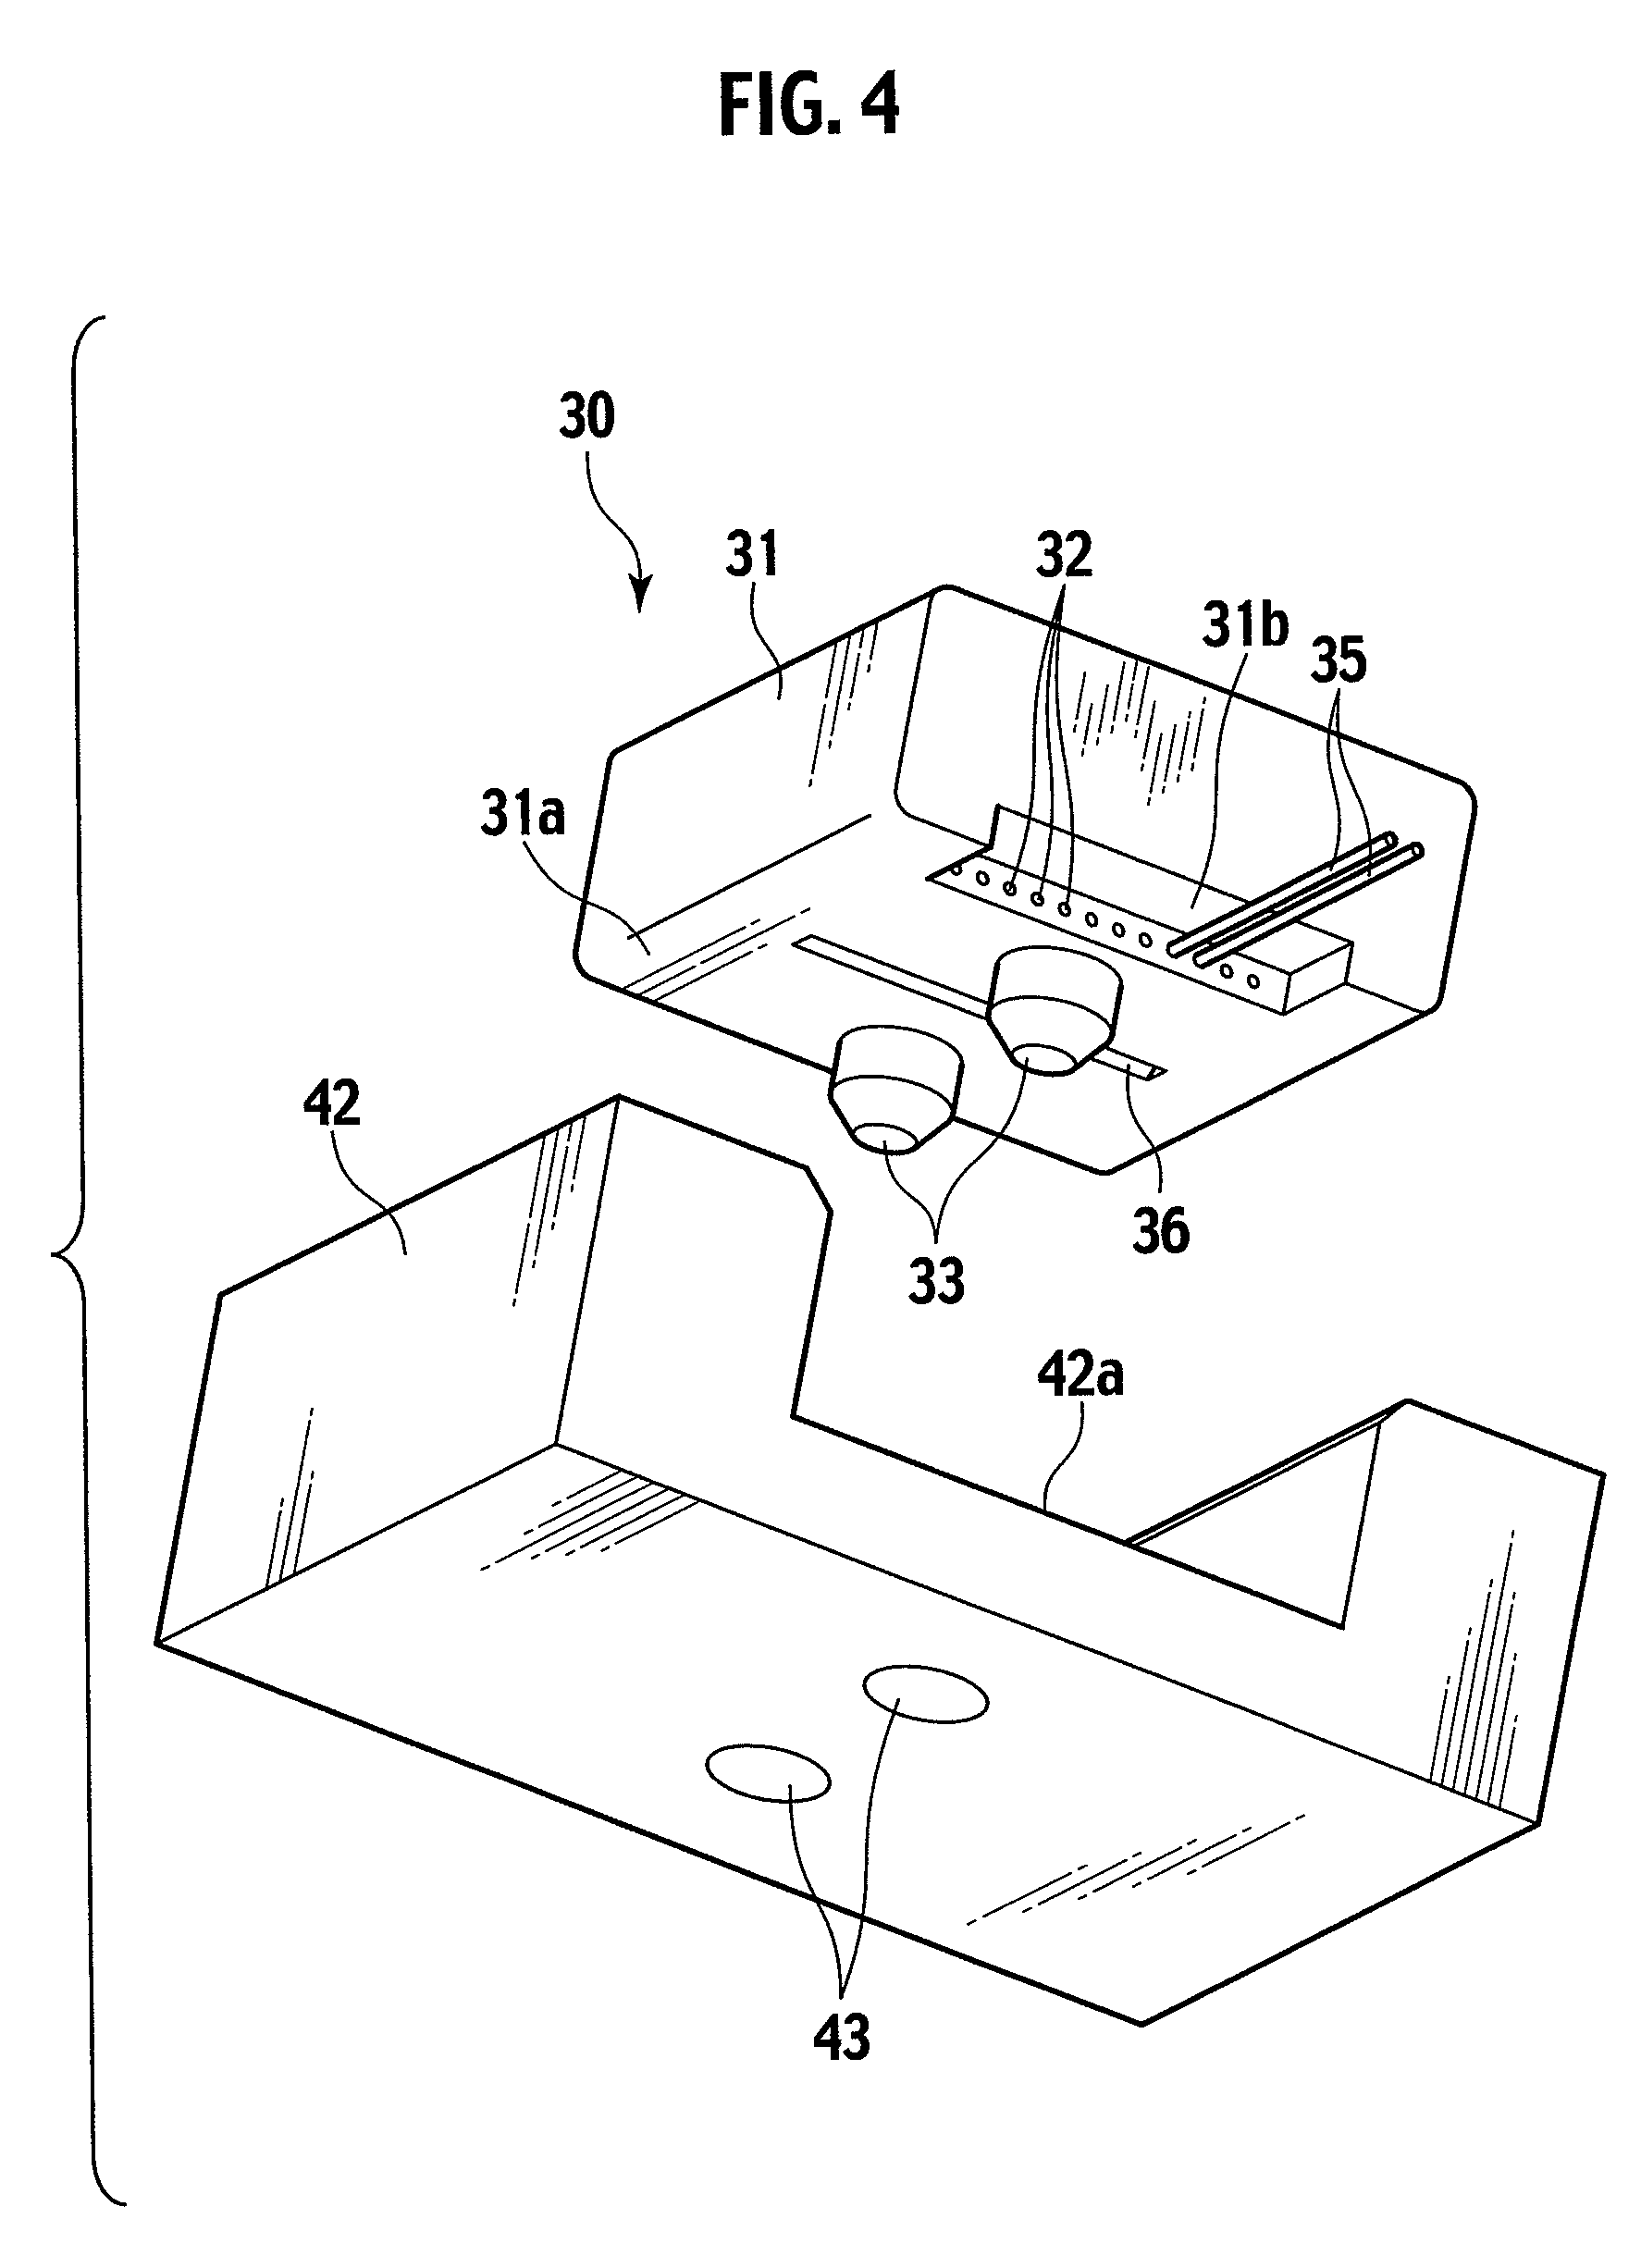 Optical connector having a fitting protrusion or fitting recess used for positioning